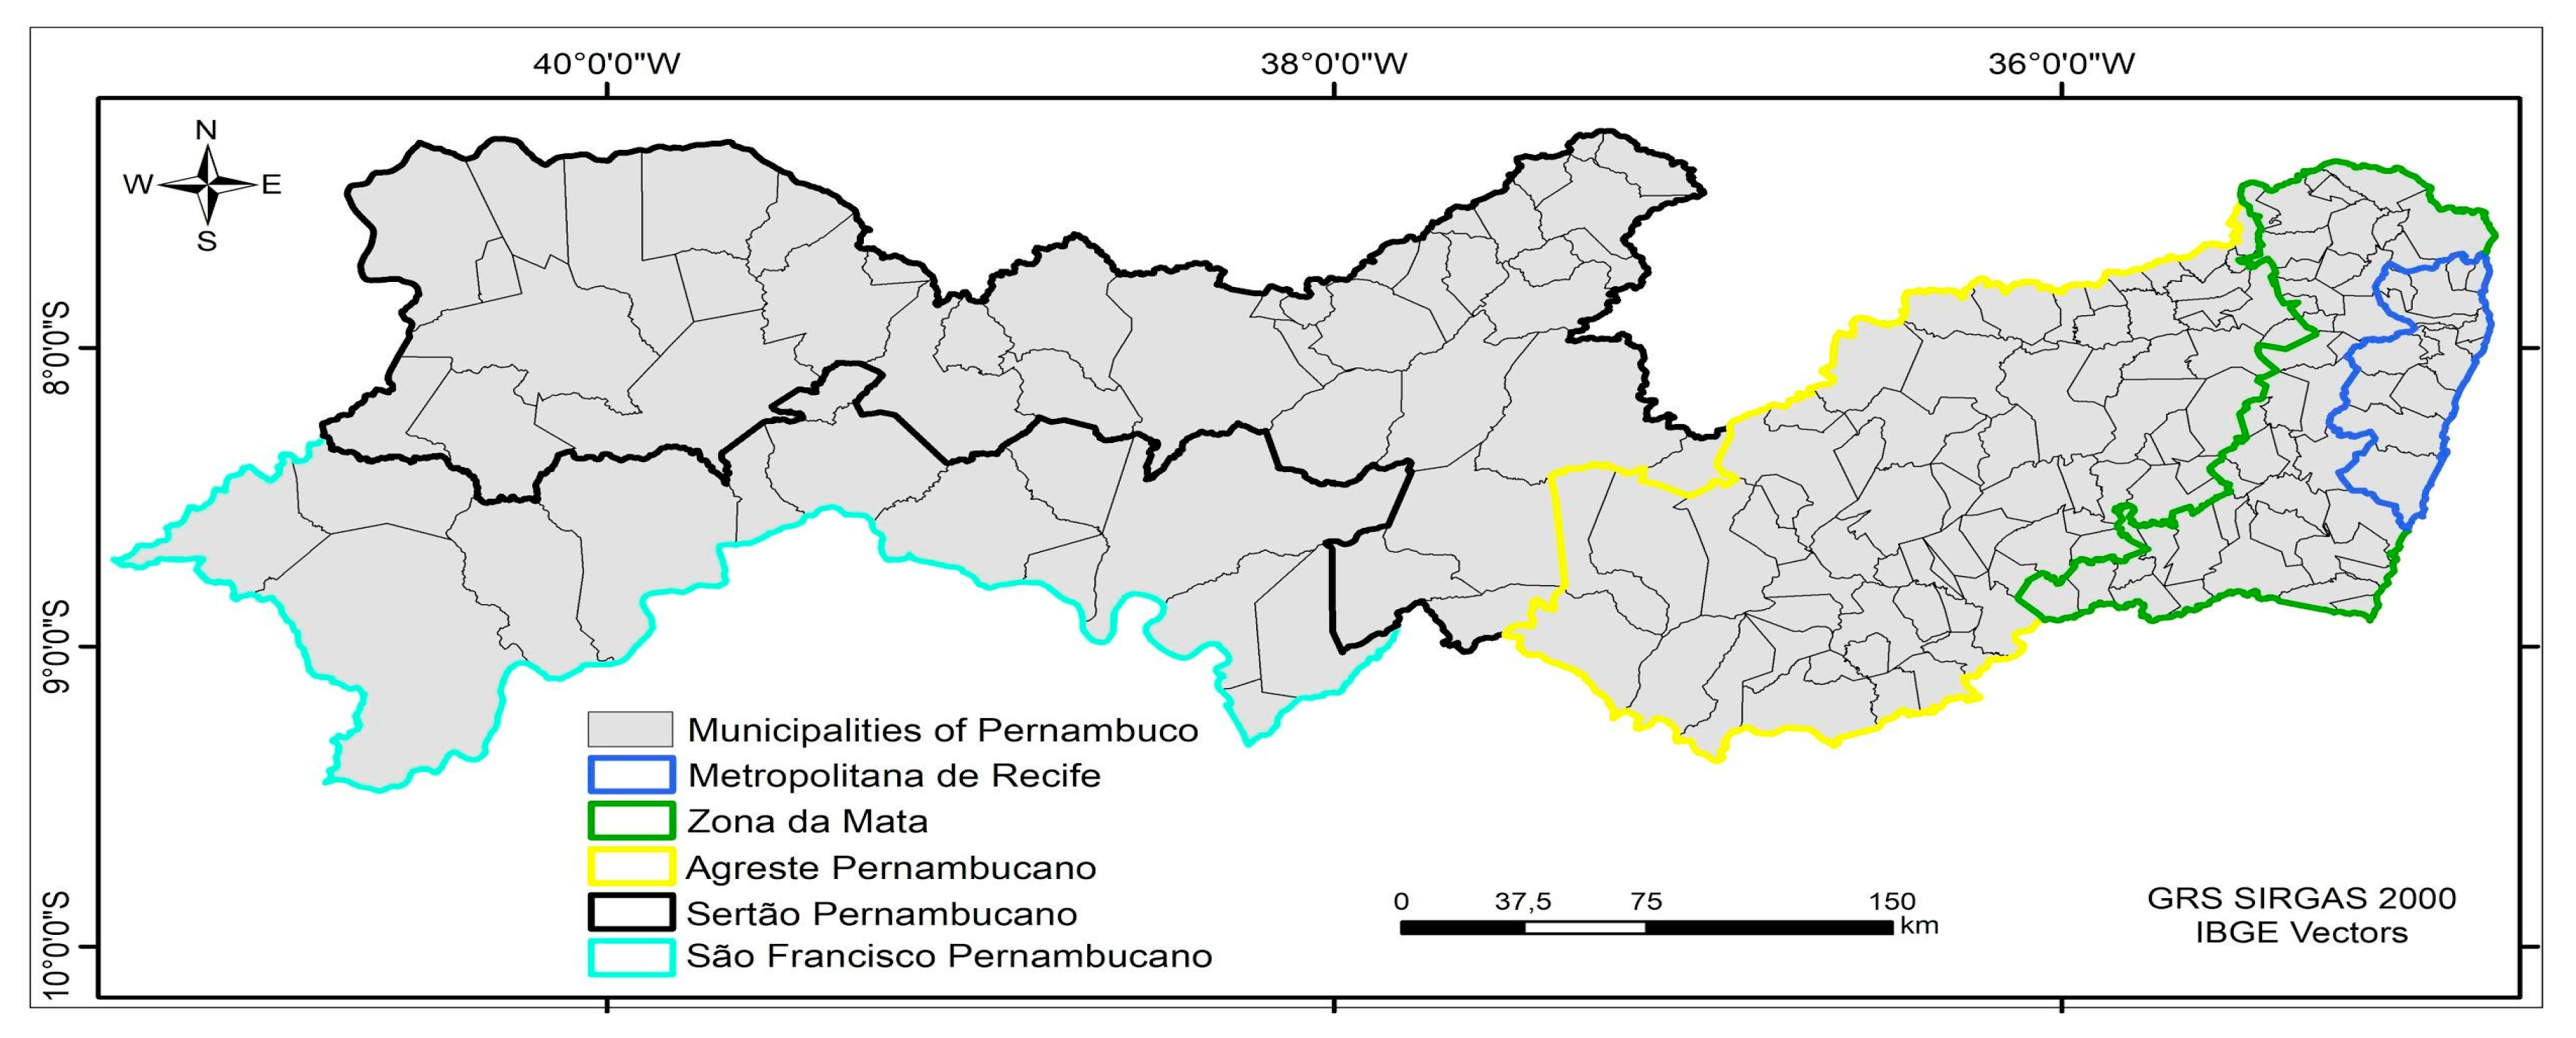 Ijgi Free Full Text Spatial Modeling For Homicide Rates Estimation In Pernambuco State Brazil Html